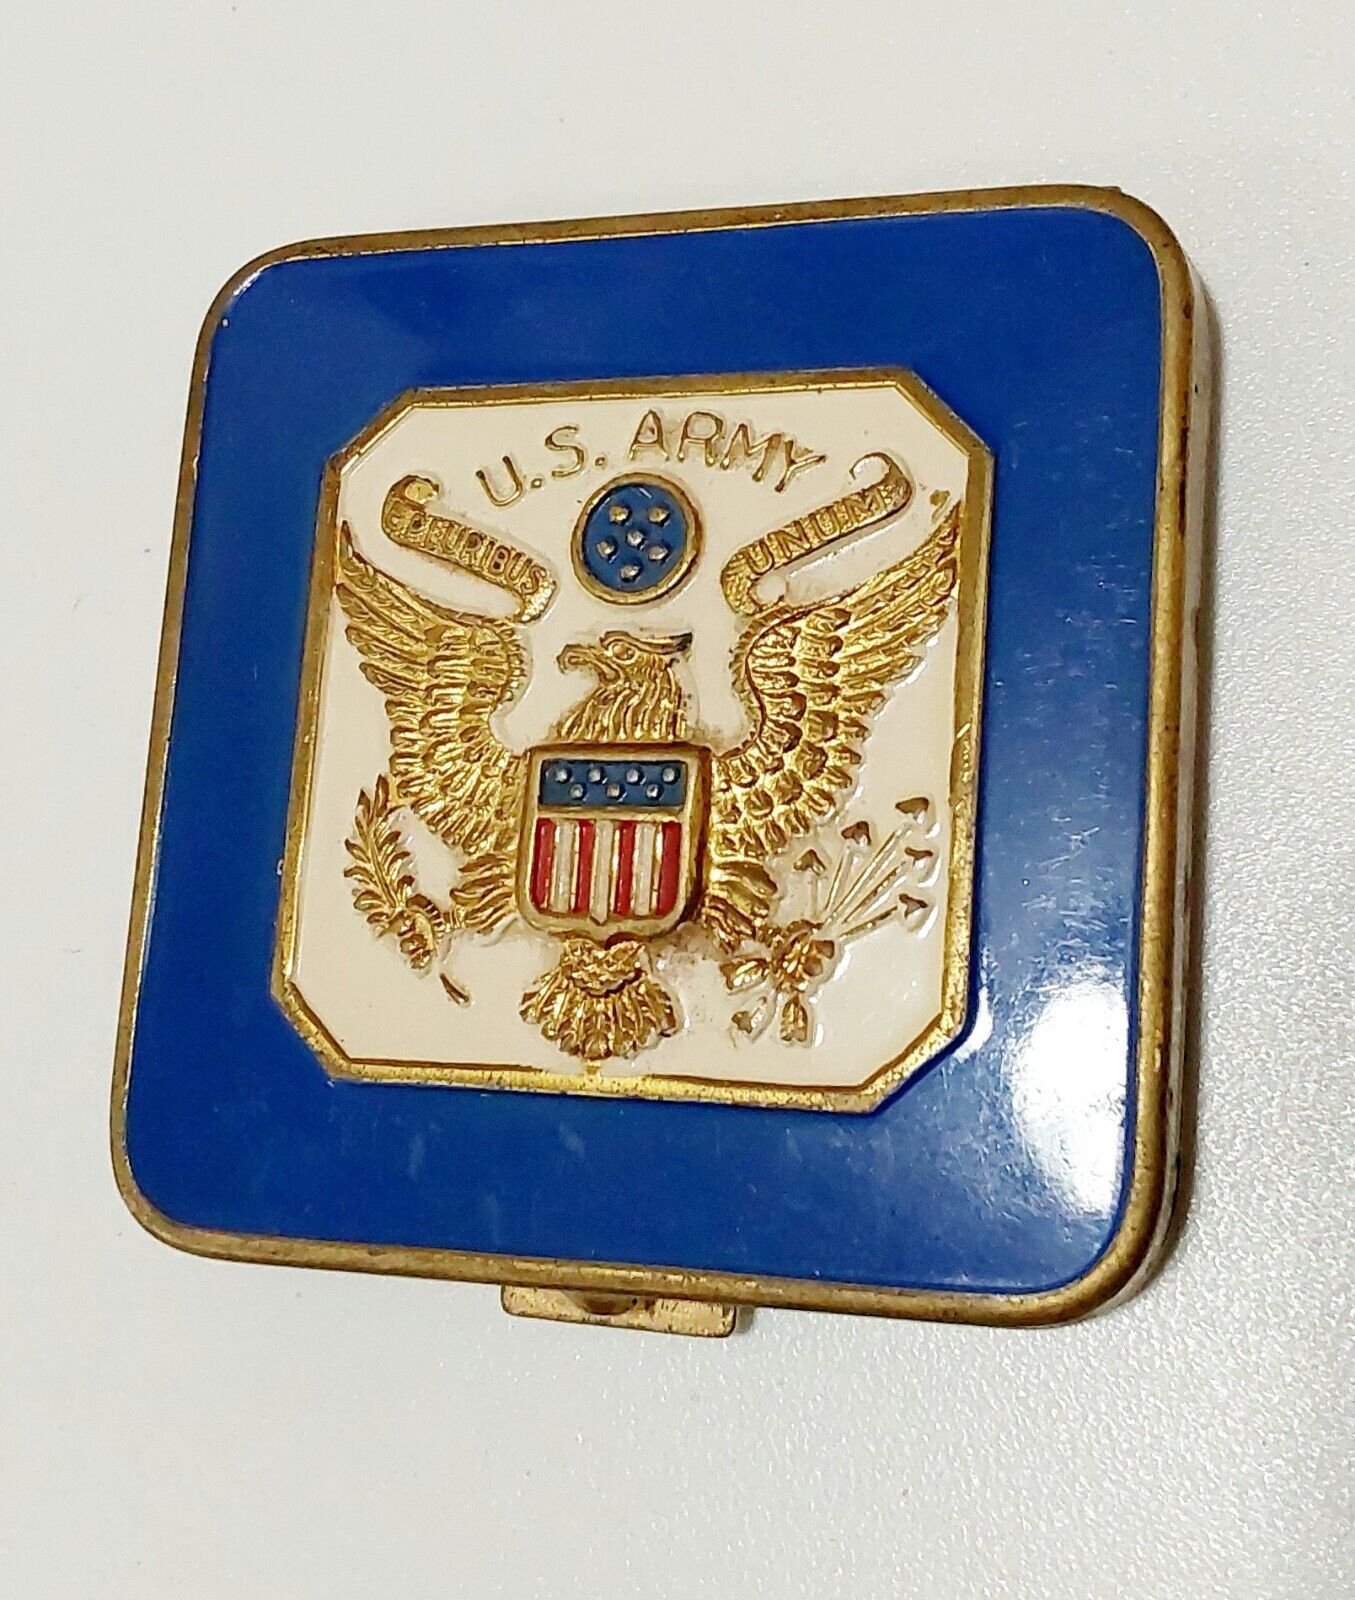 Vintage US Army Sweetheart Makeup Powder Compact Blue&Gold With Mirror and Puff